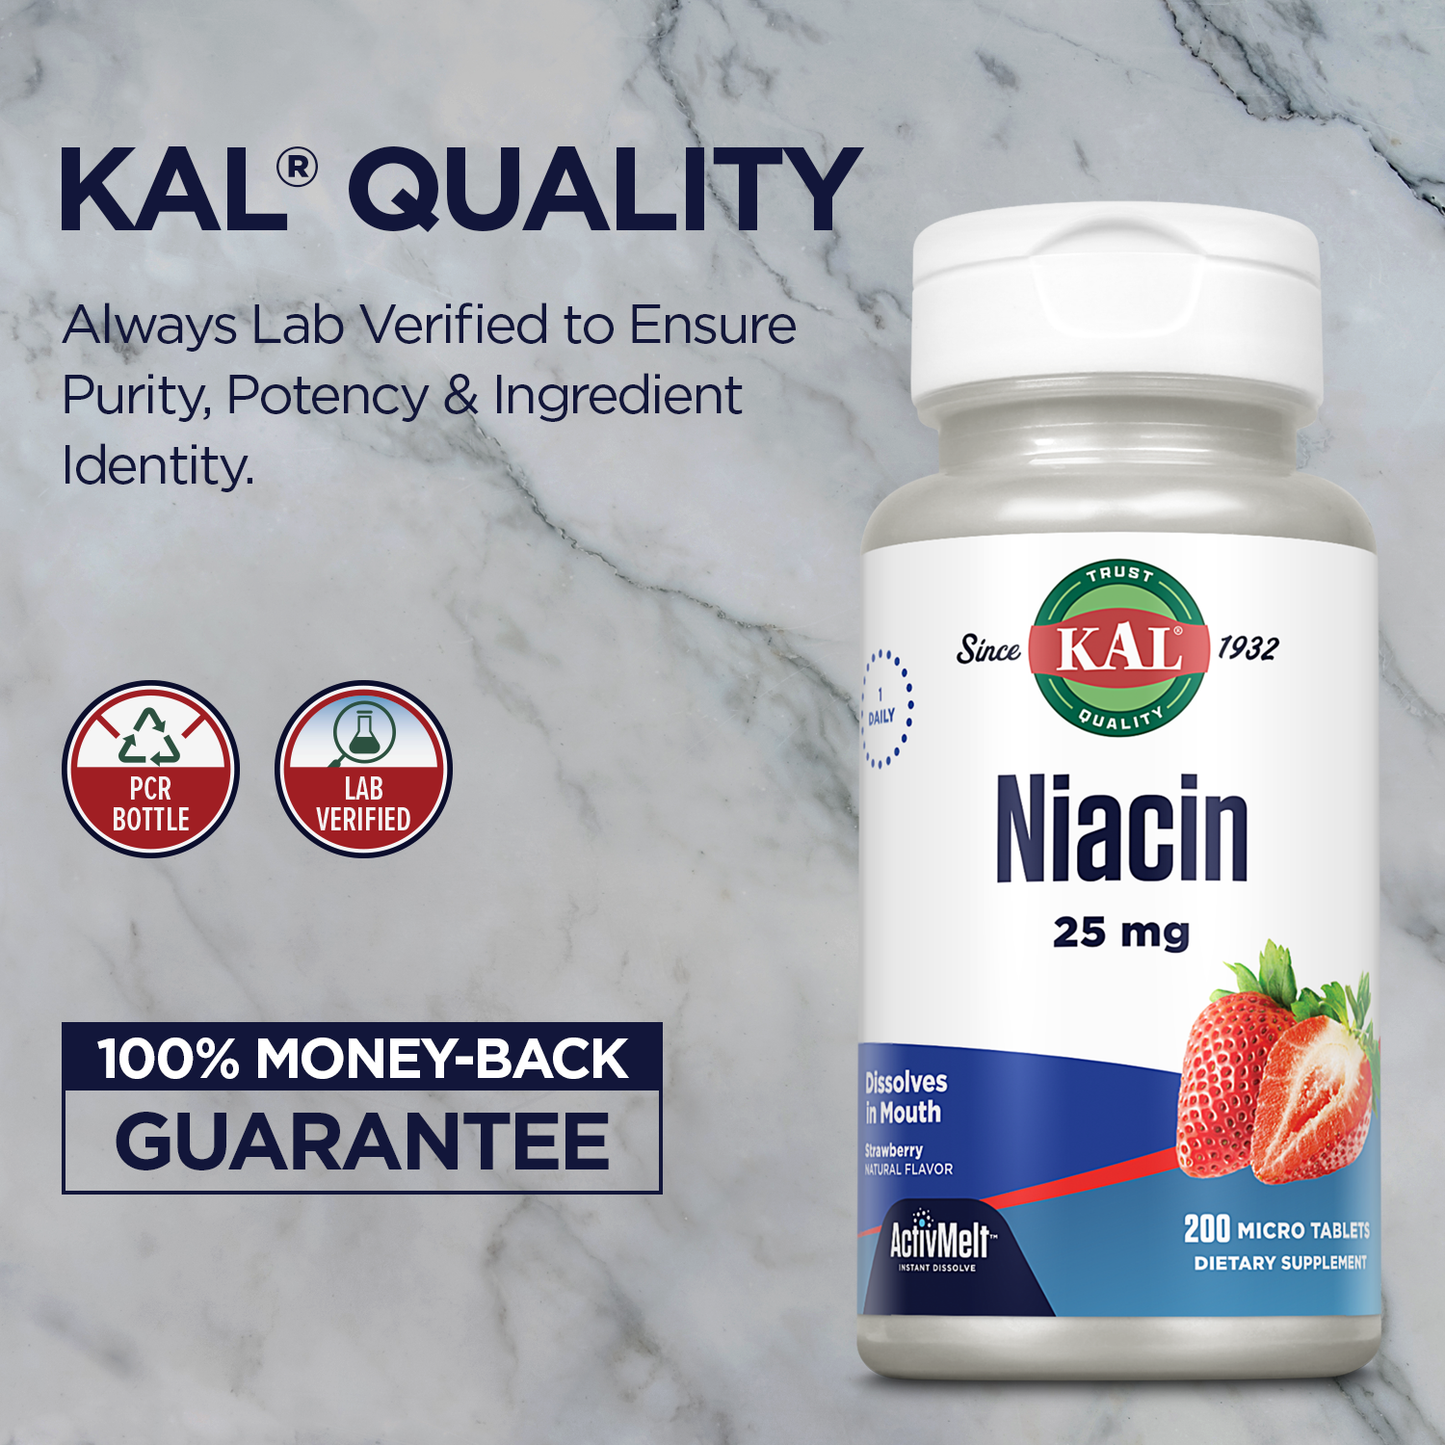 KAL Niacin 25mg ActivMelt, Once Daily Vitamin B3 Supplement, Energy Metabolism, Skin, Nerve & Digestive Health Support, Enhanced Absorption, Natural Strawberry Flavor, 200 Servings, 200 Micro Tablets